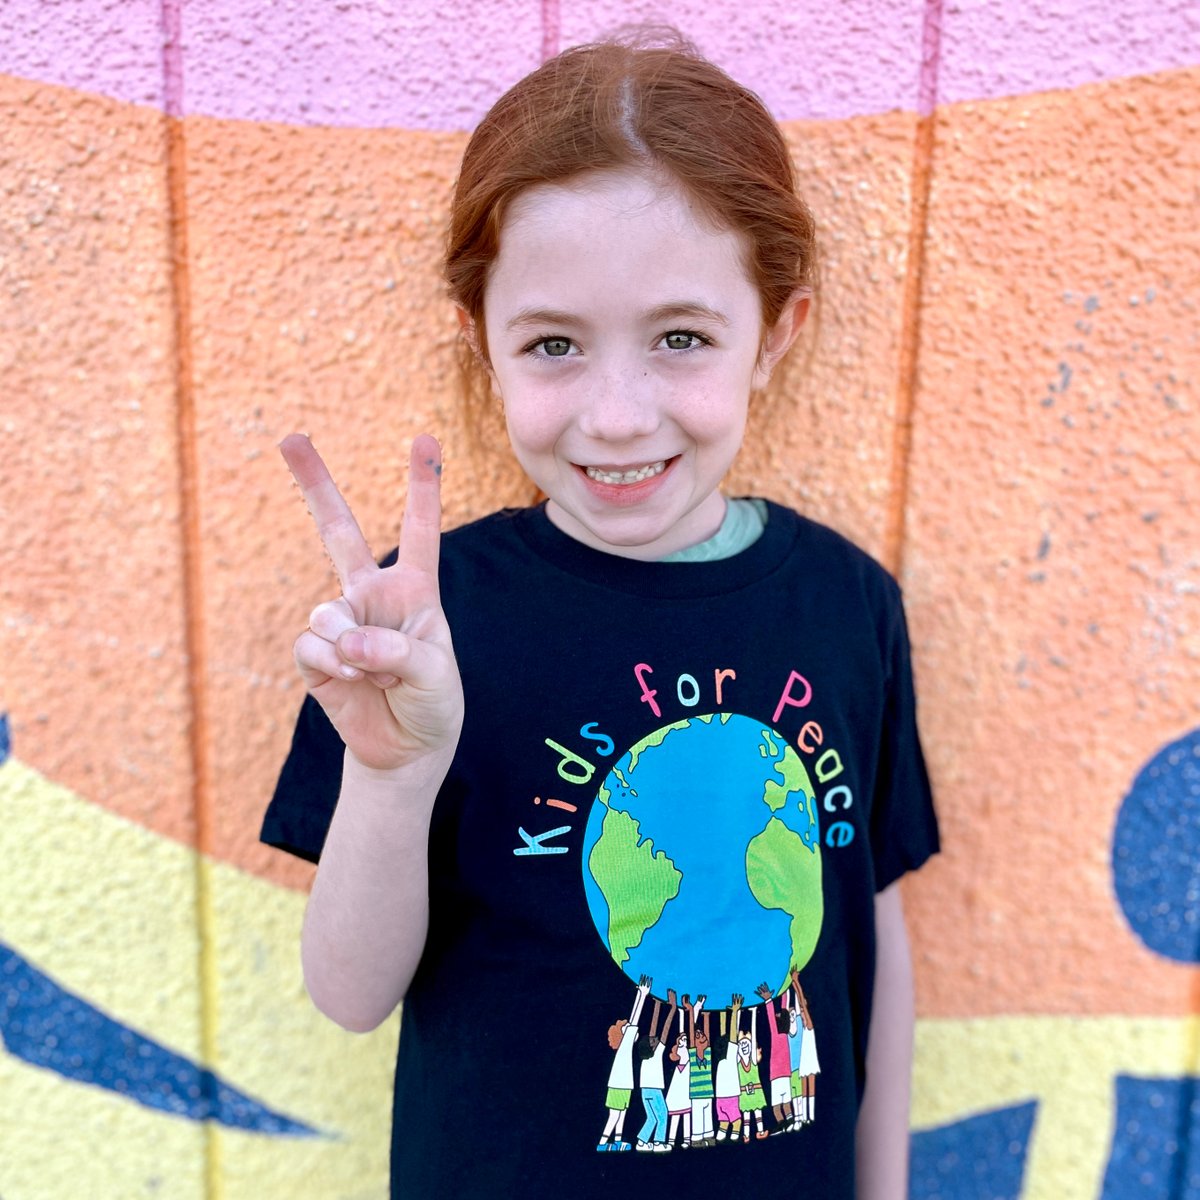 'Great things happen to those who don't stop believing, trying, learning, and being grateful.' ― Roy T. Bennett ❤️&✌️ #KidsforPeace #PeaceFingerFriday #believeinpeace #kindnessmatters